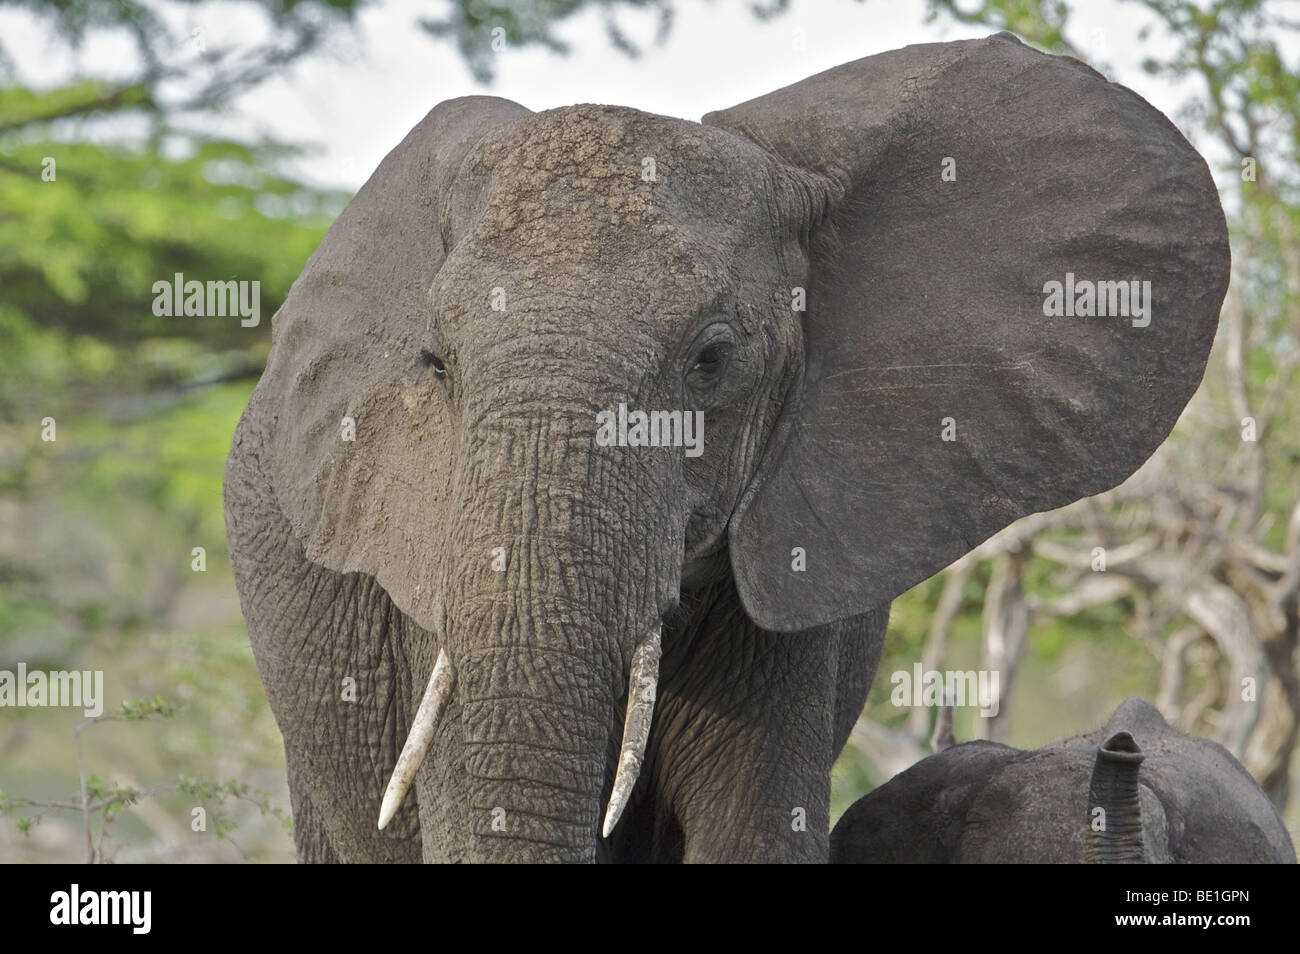 Elephant from the Selous Game Reserve Tanzania, East Africa region Stock Photo